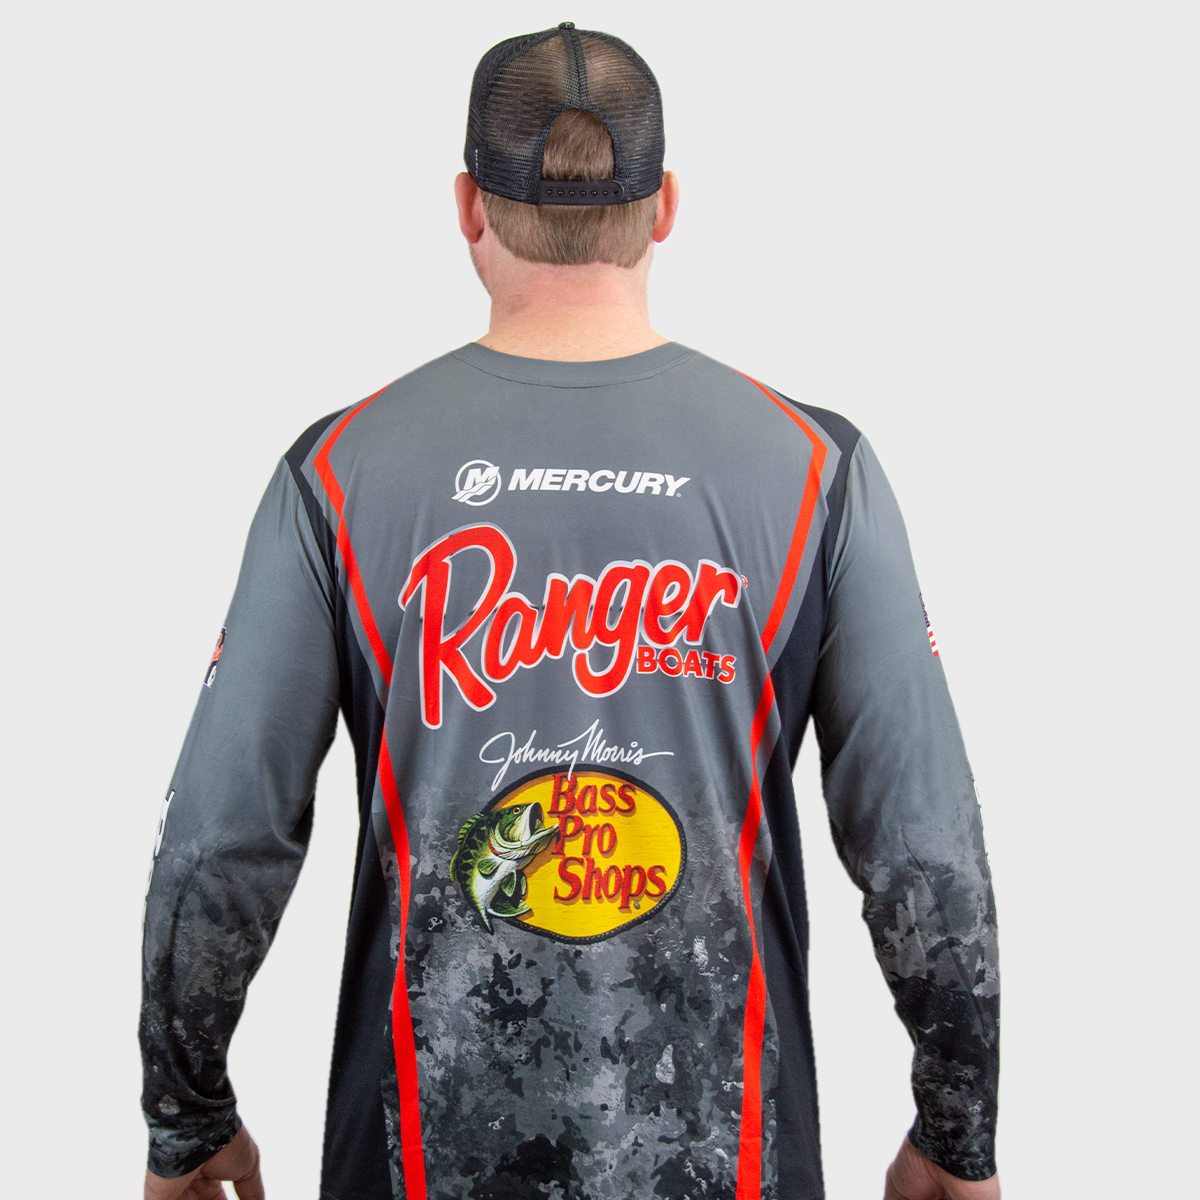 Ranger Boats 100% Cotton Fishing Shirts & Tops for sale